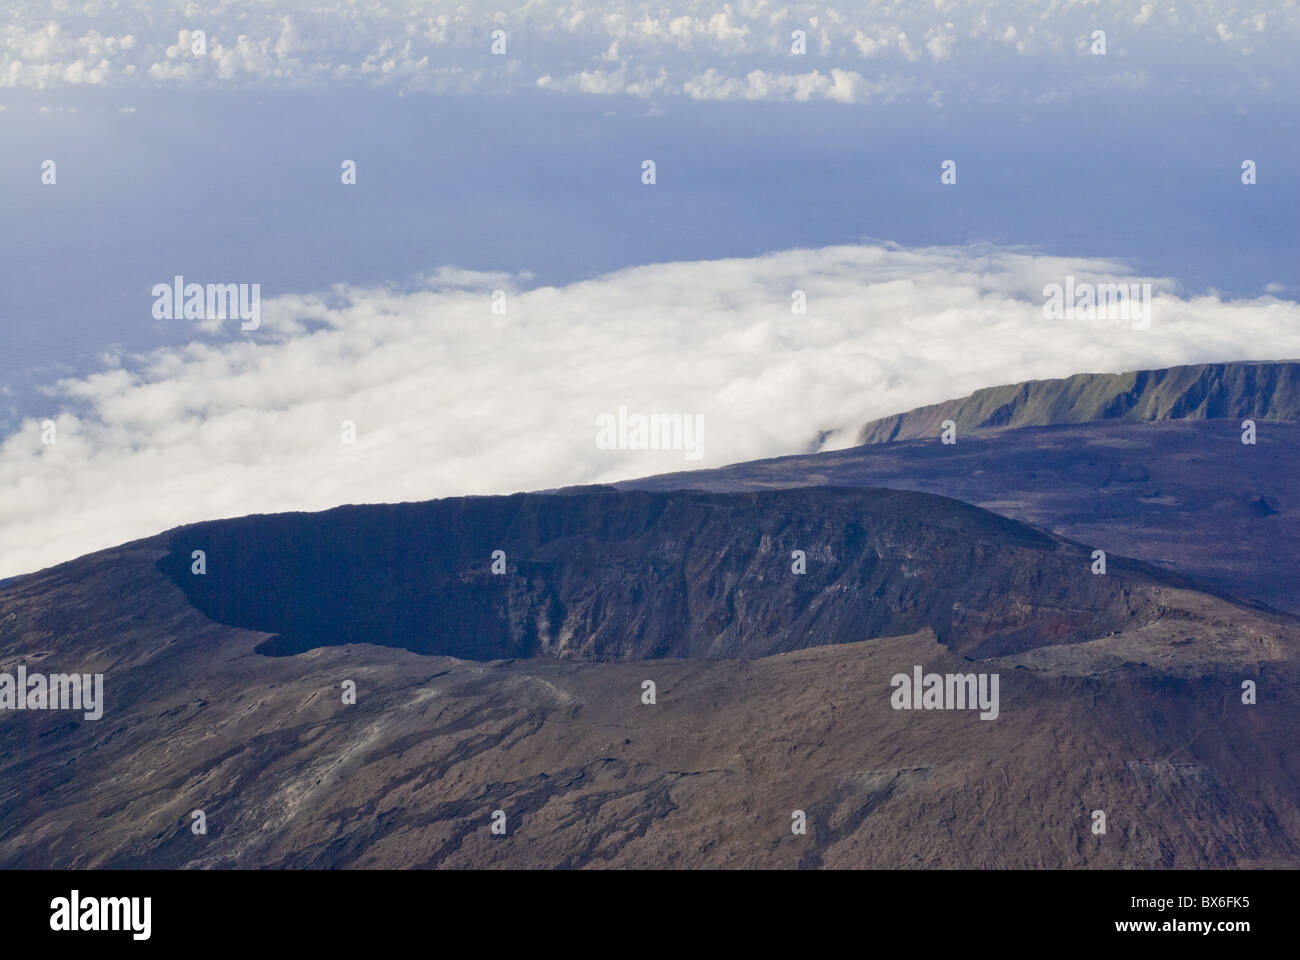 Aerial view of the crater of Piton de la Fournaise volcano, La Reunion, Indian Ocean, Africa Stock Photo